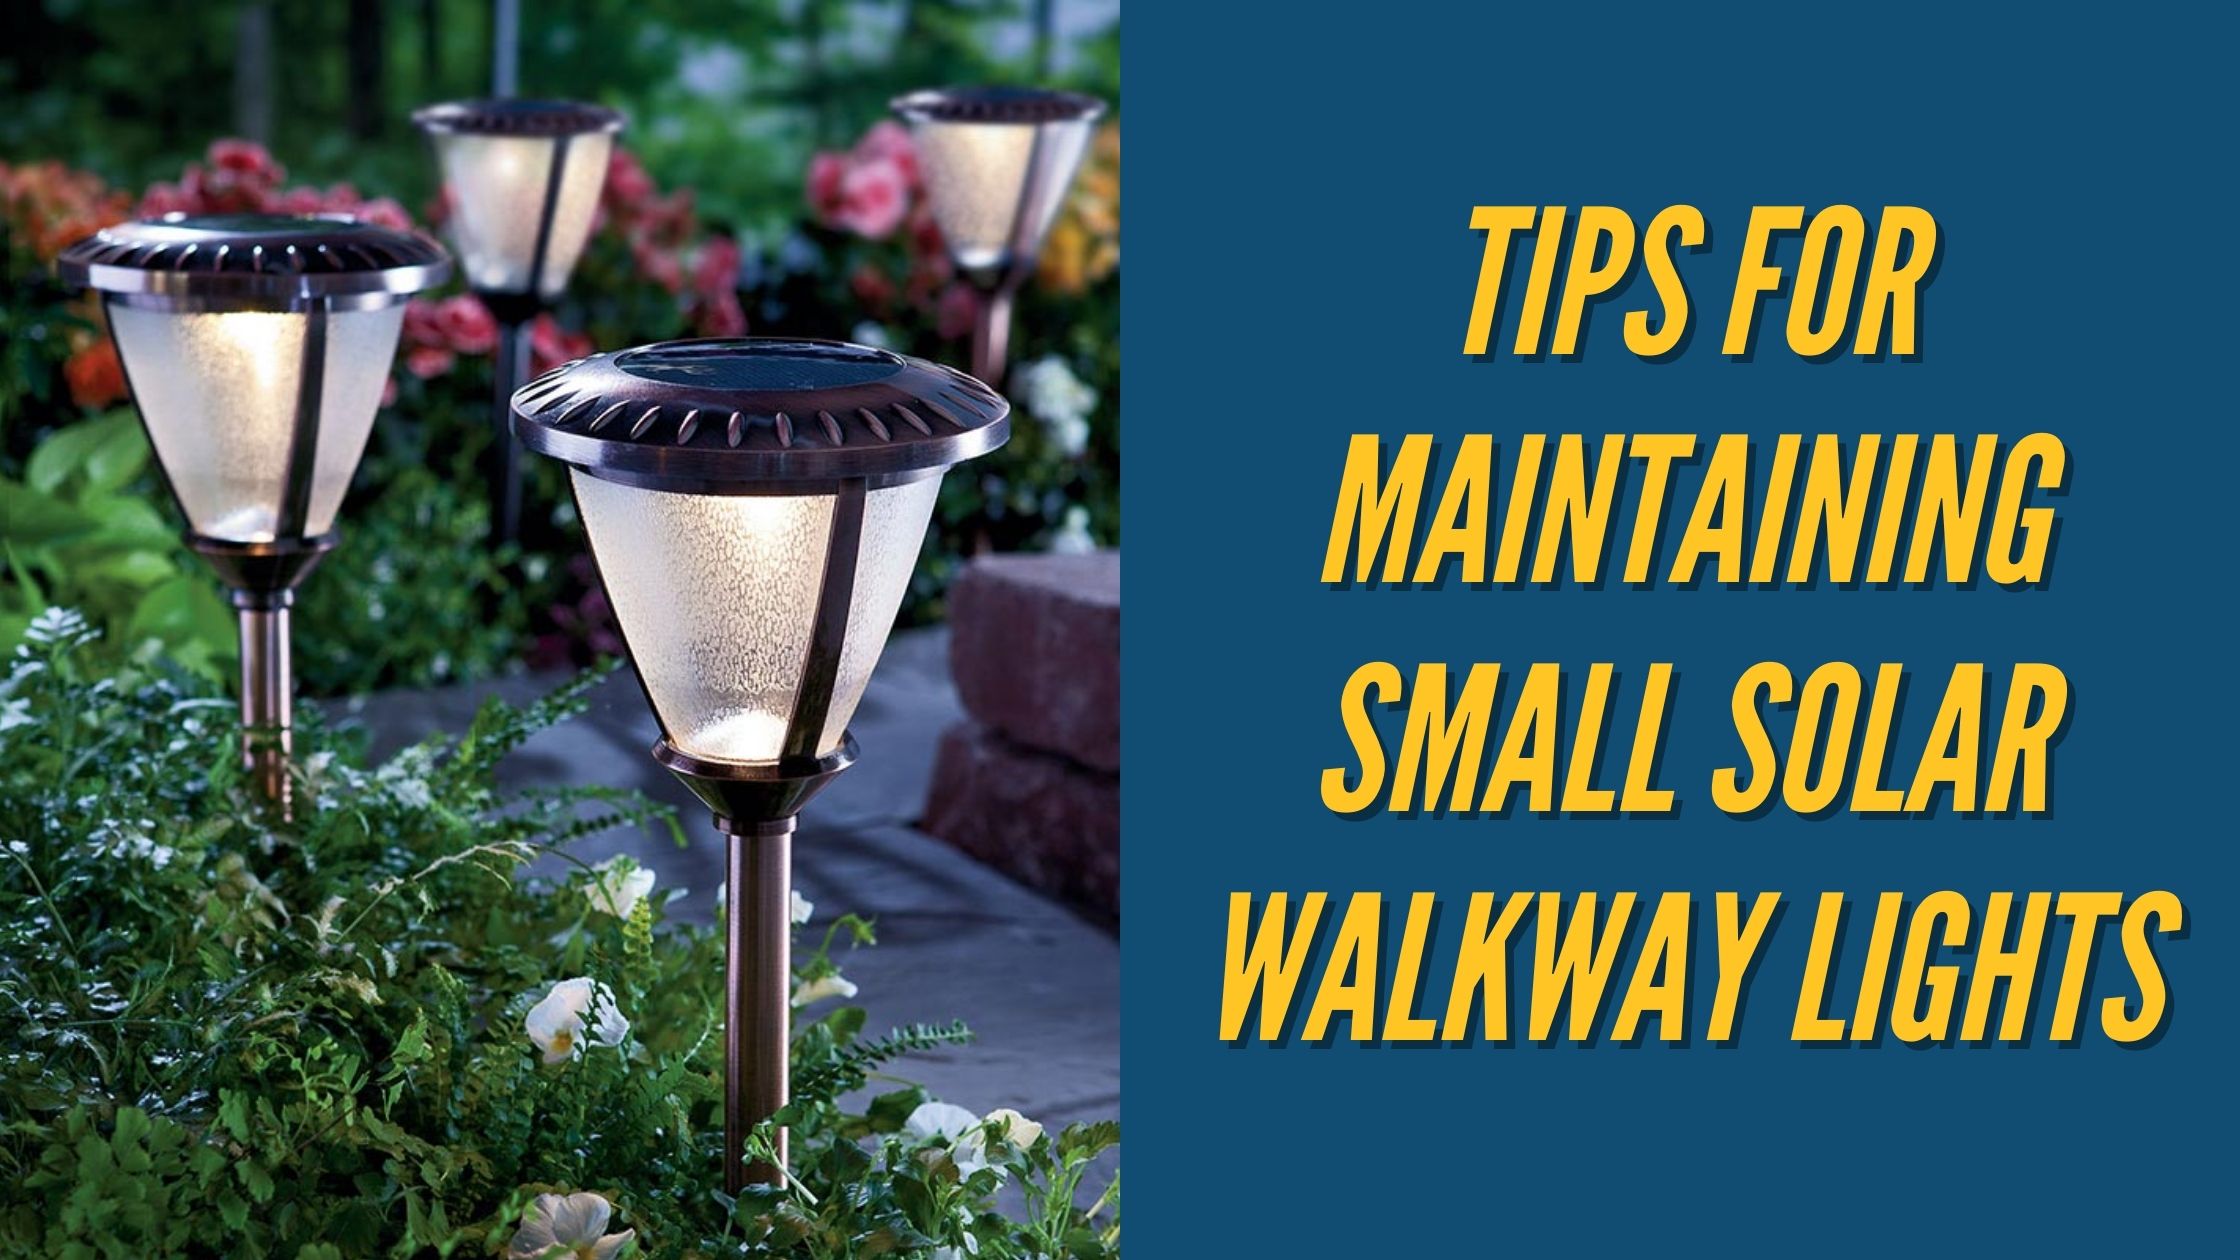 Tips for Maintaining Small Solar Walkway Lights